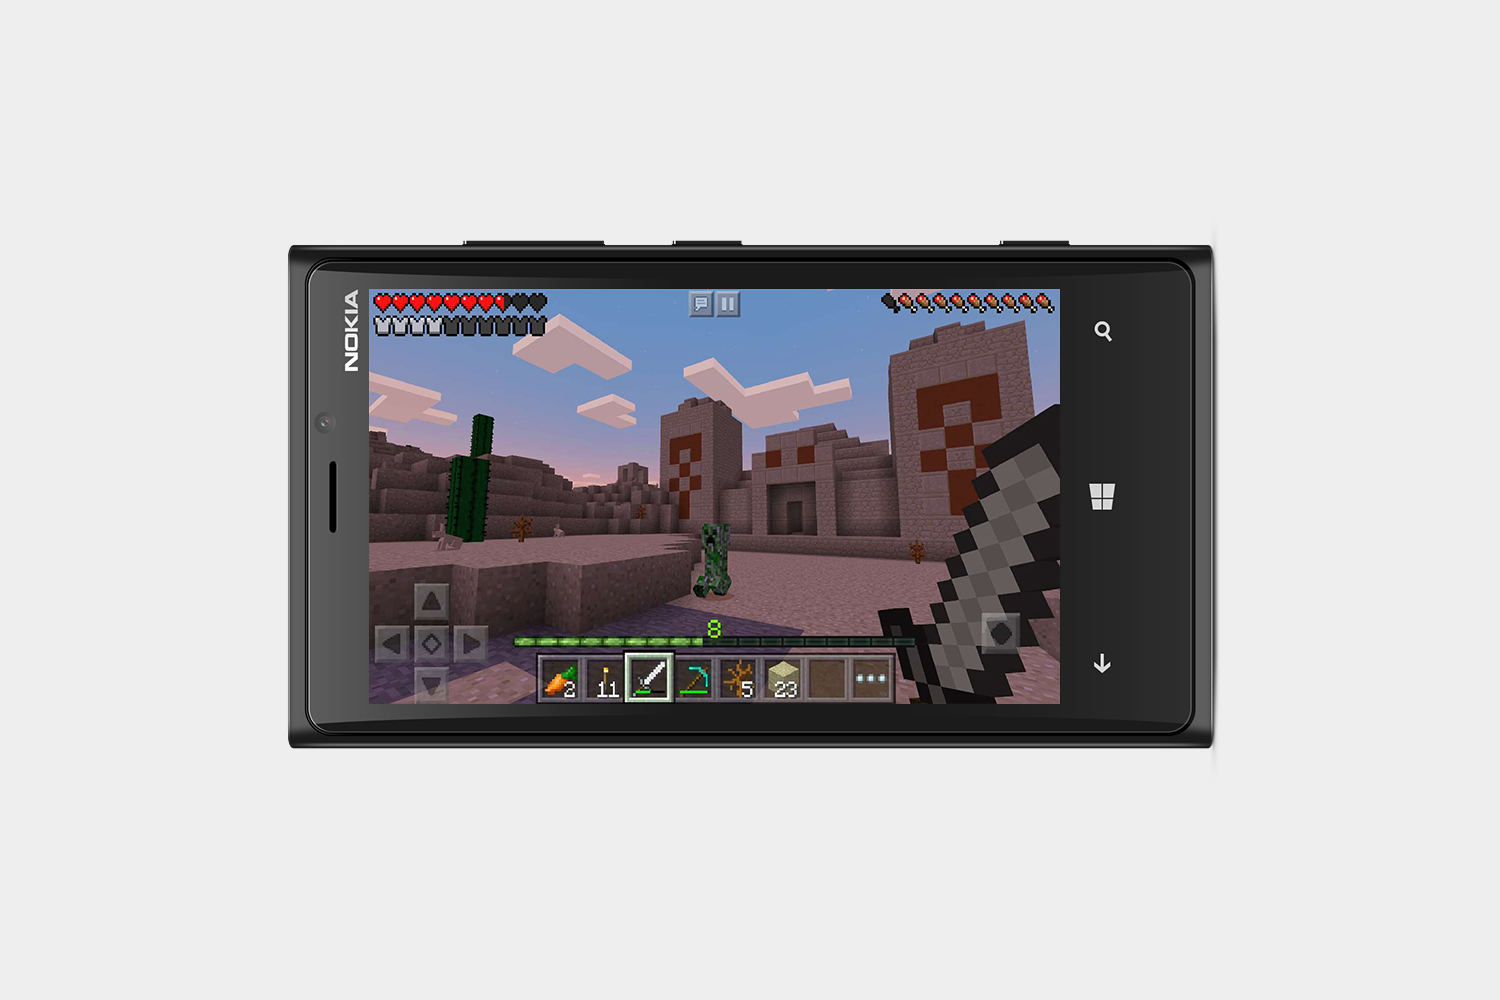 Apps for ios and android - minecraft: pocket Edition price : 9.99